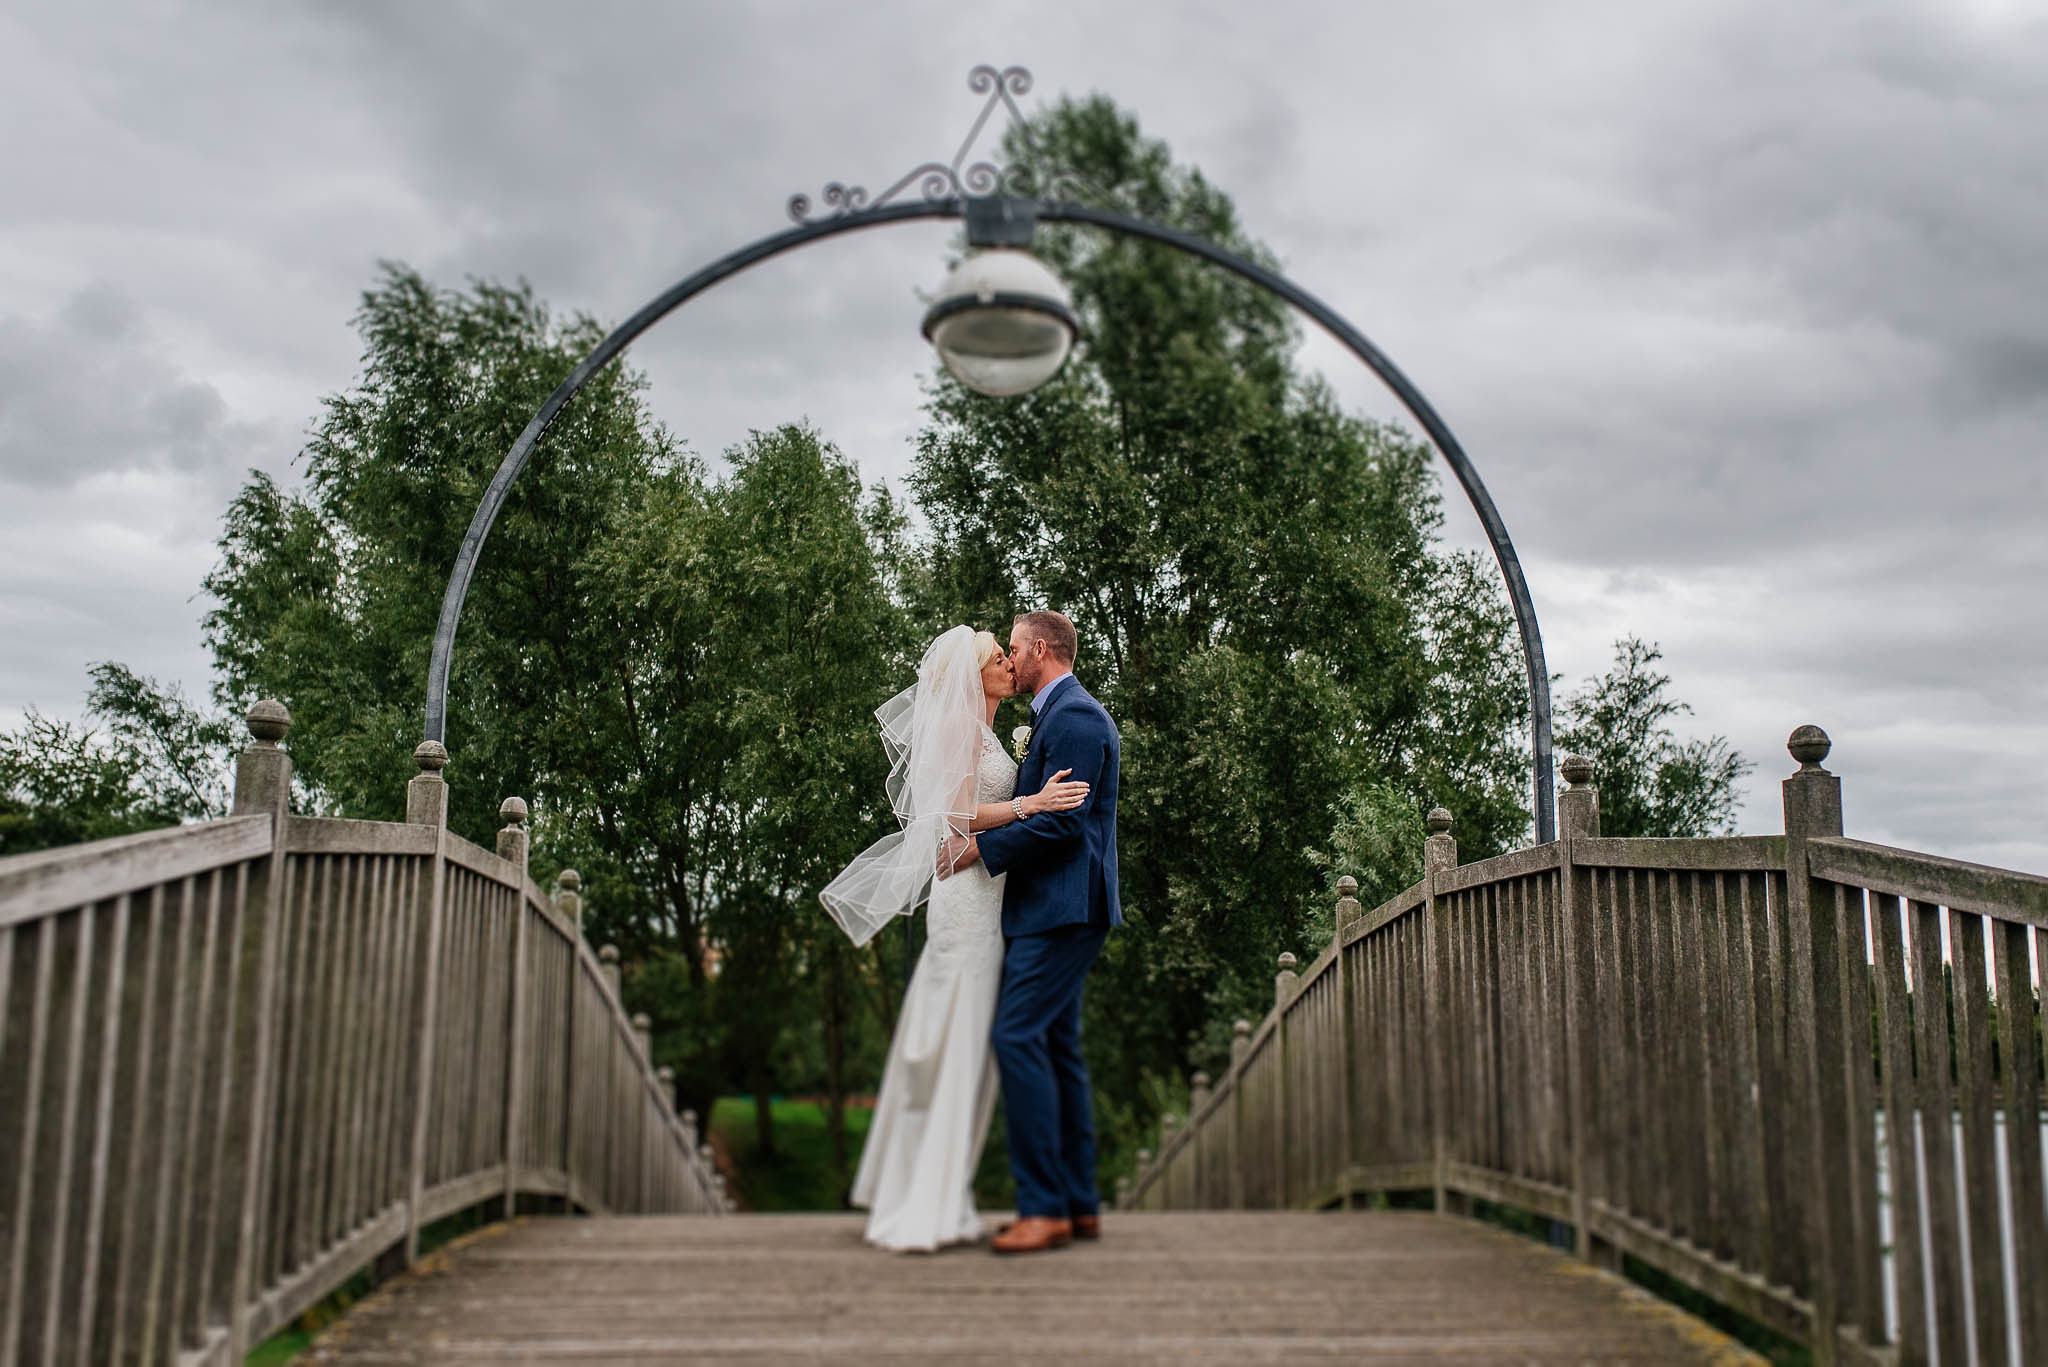 A newly married couple shares a romantic kiss on a picturesque arched bridge in Lakeside, Doncaster on their wedding day.